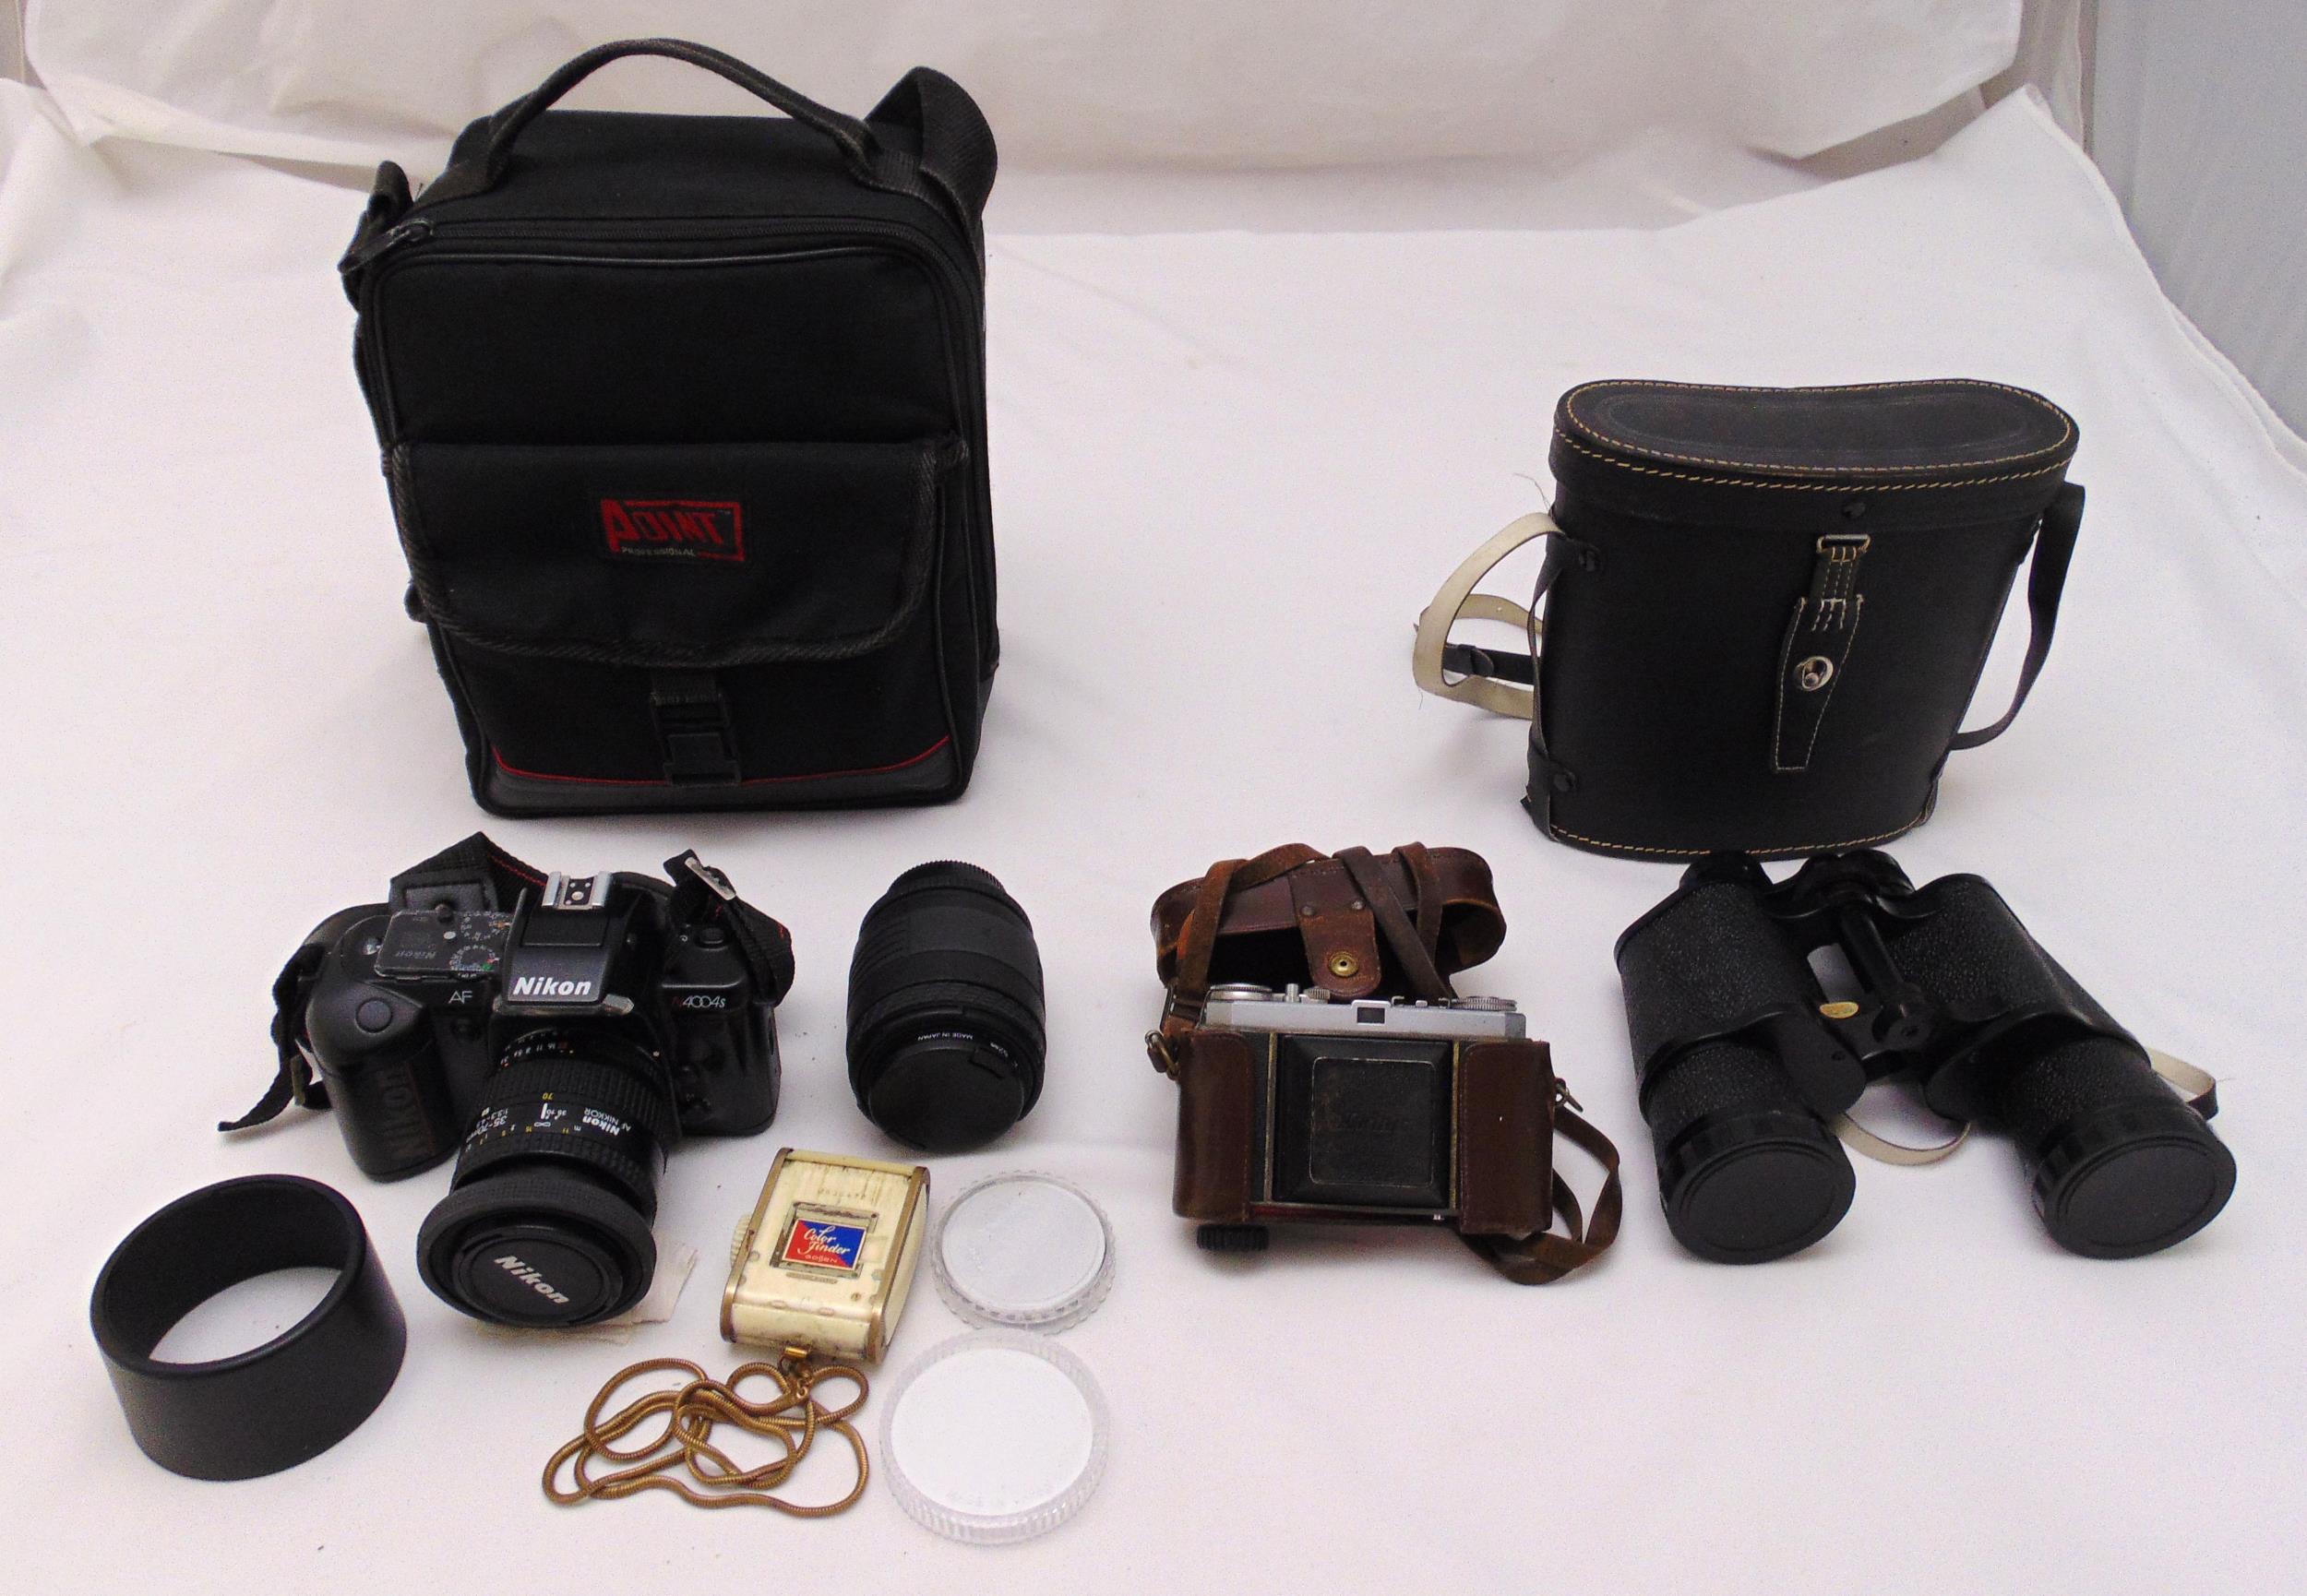 Nikon AF camera and accessories, a pair of binoculars in fitted case and a Kodak Retina camera in